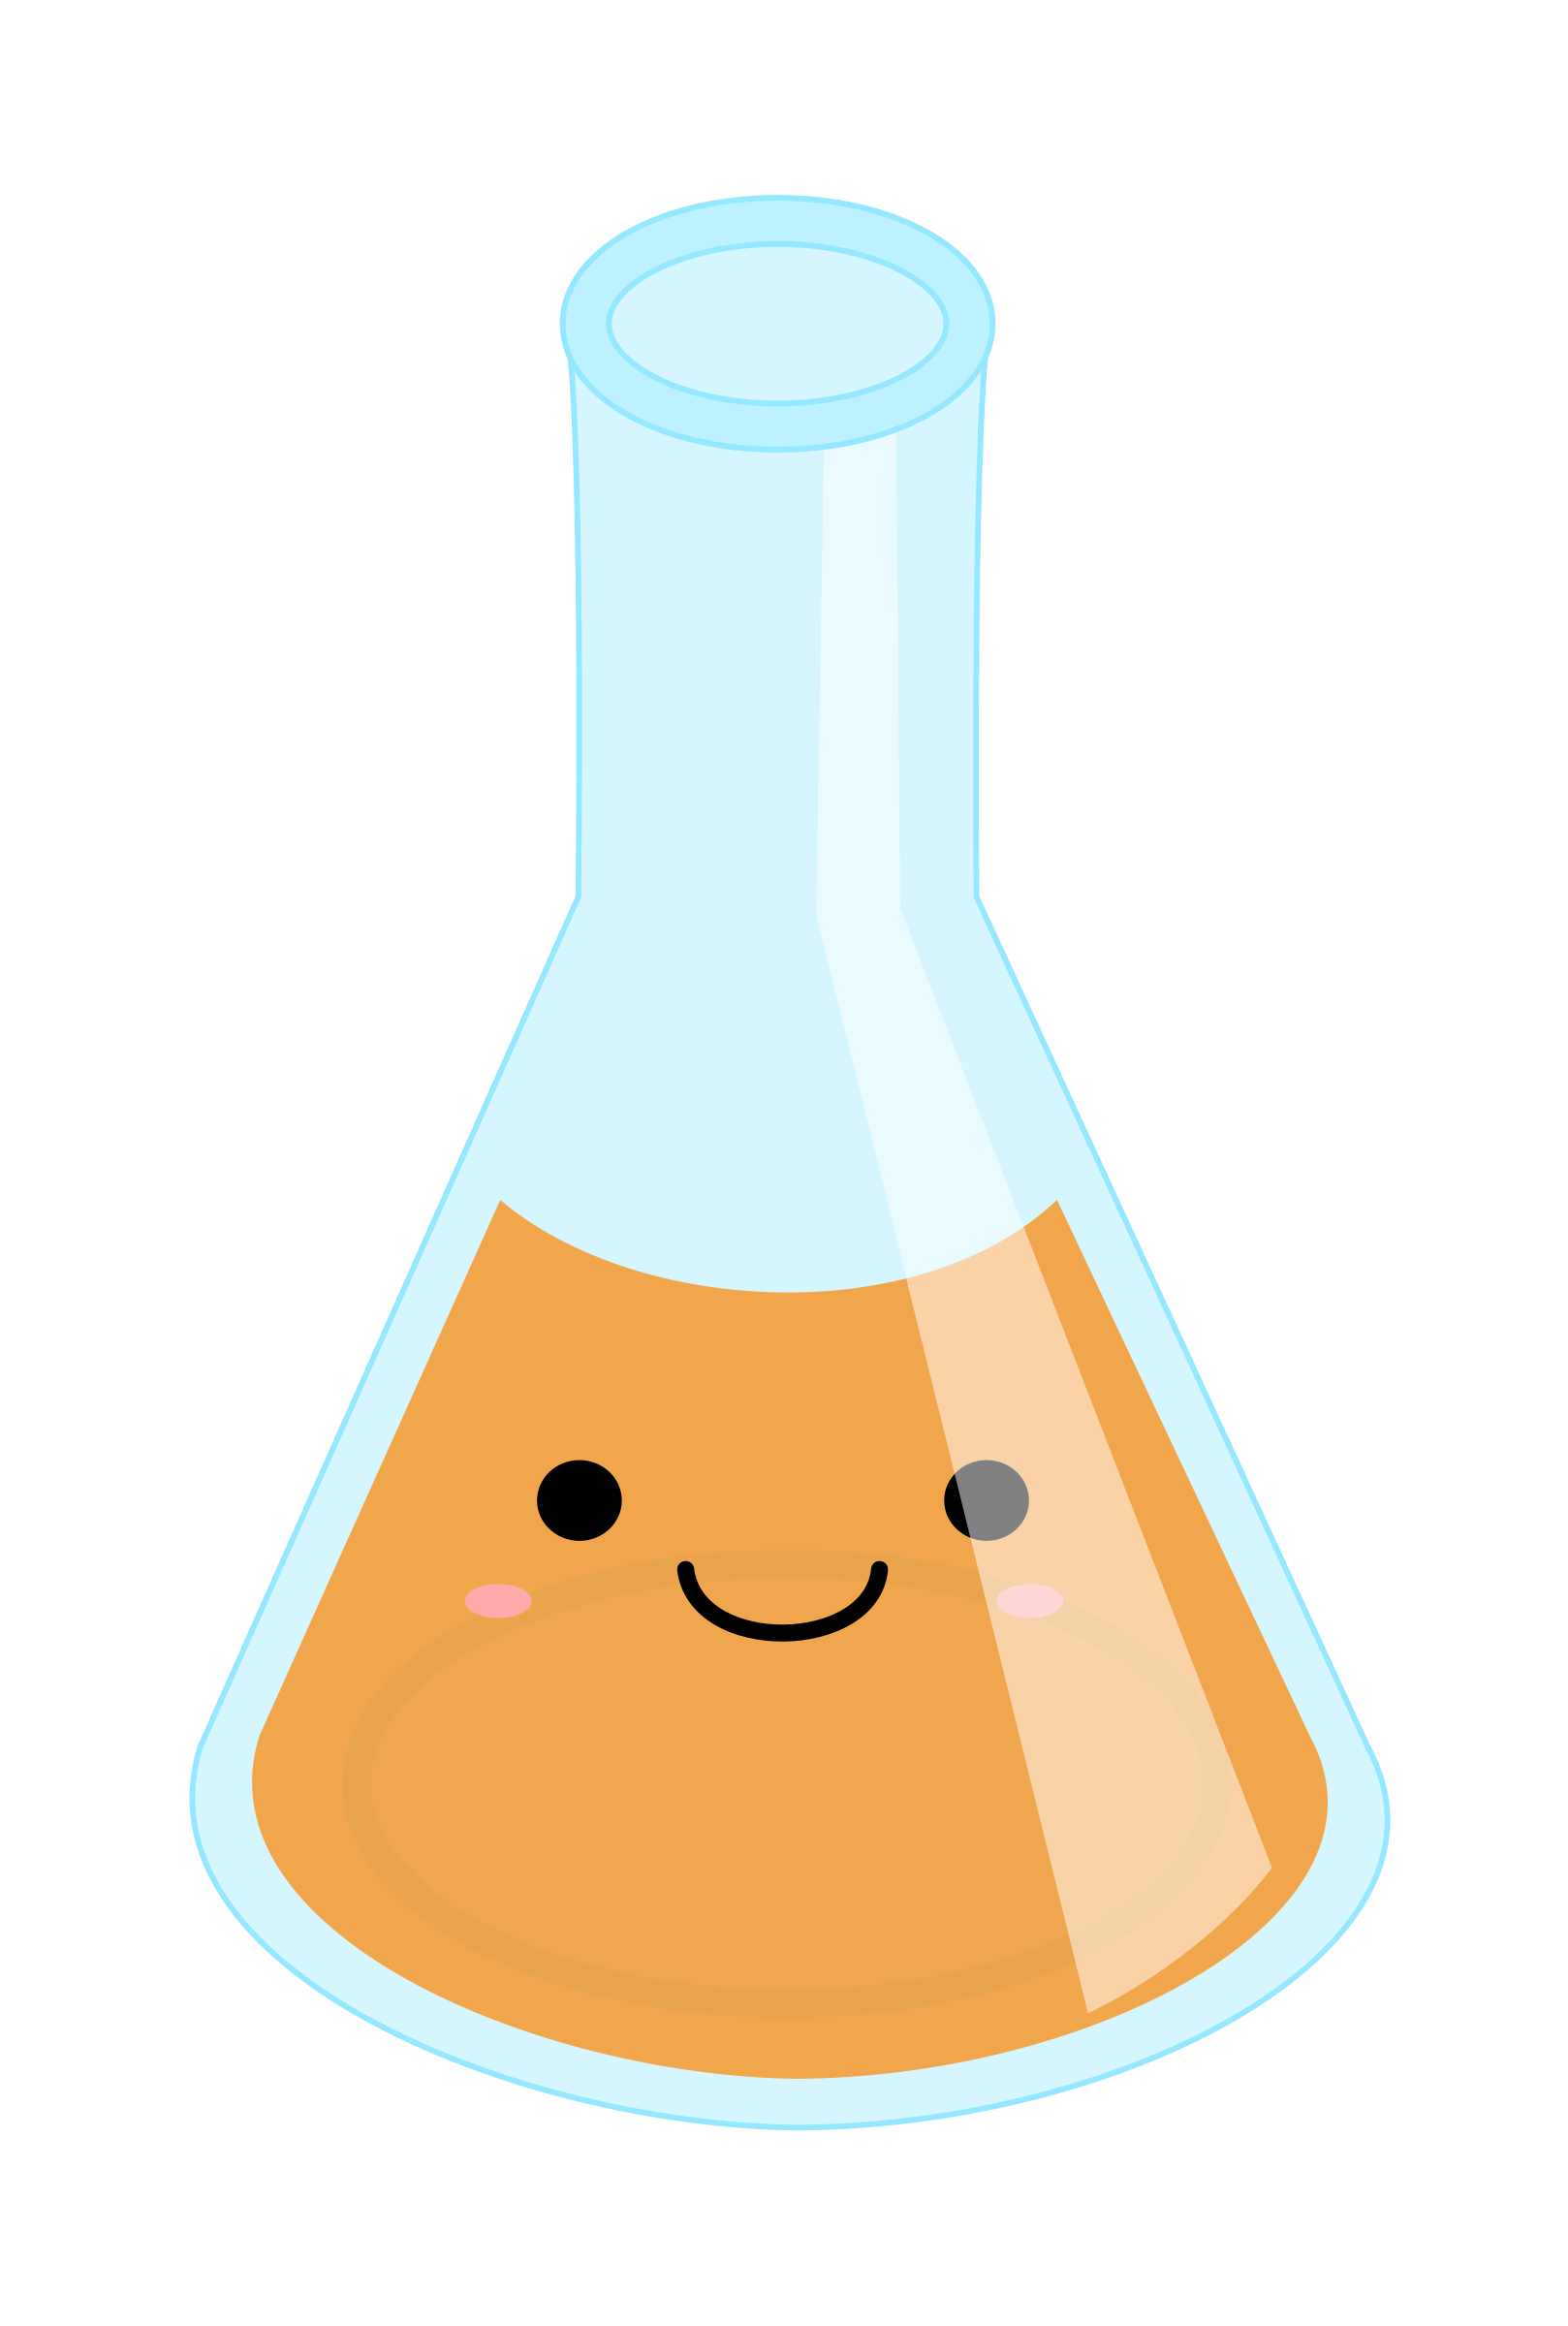 Full erlenmeyer flask by. Youtube clipart kawaii